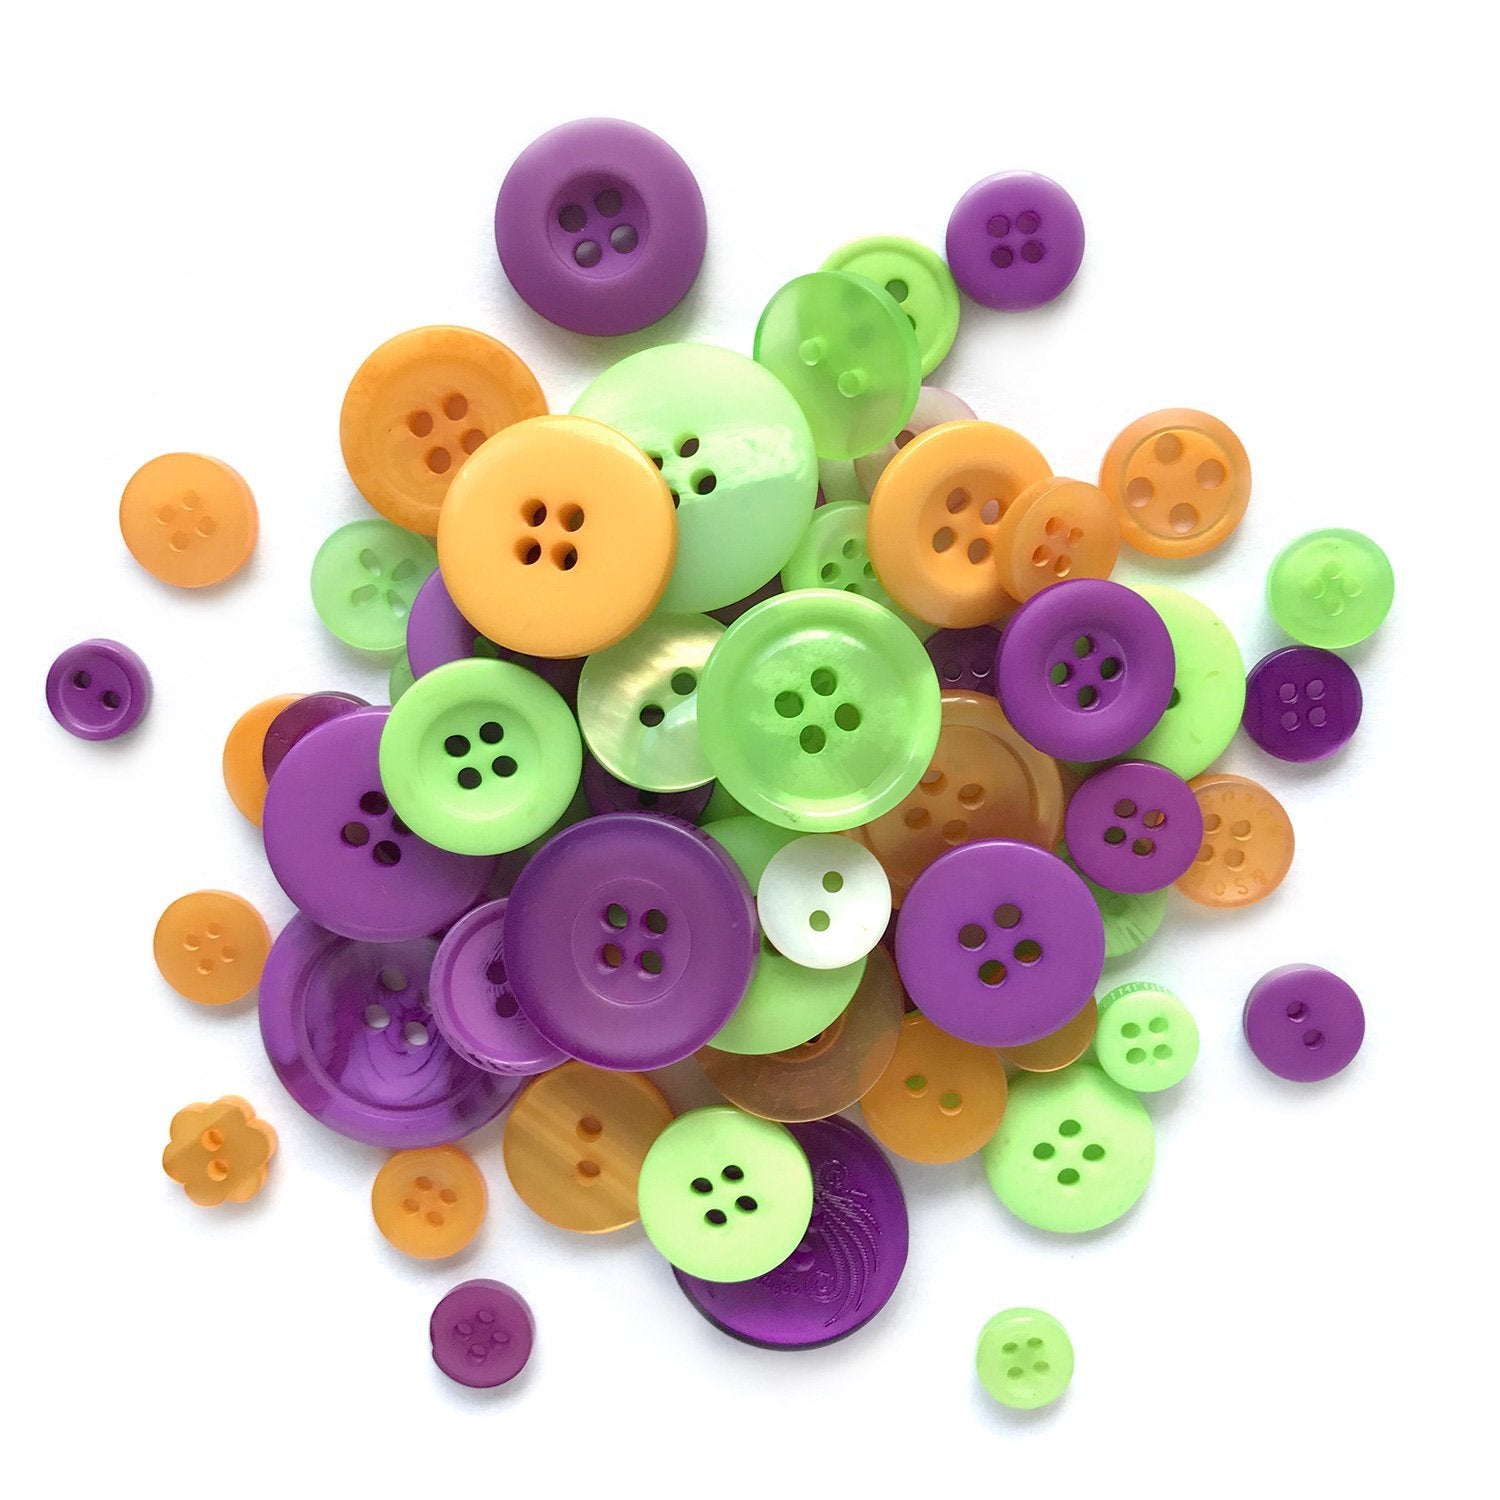 Bright Purple, Lime Green & Orange Buttons for Crafts Sewing